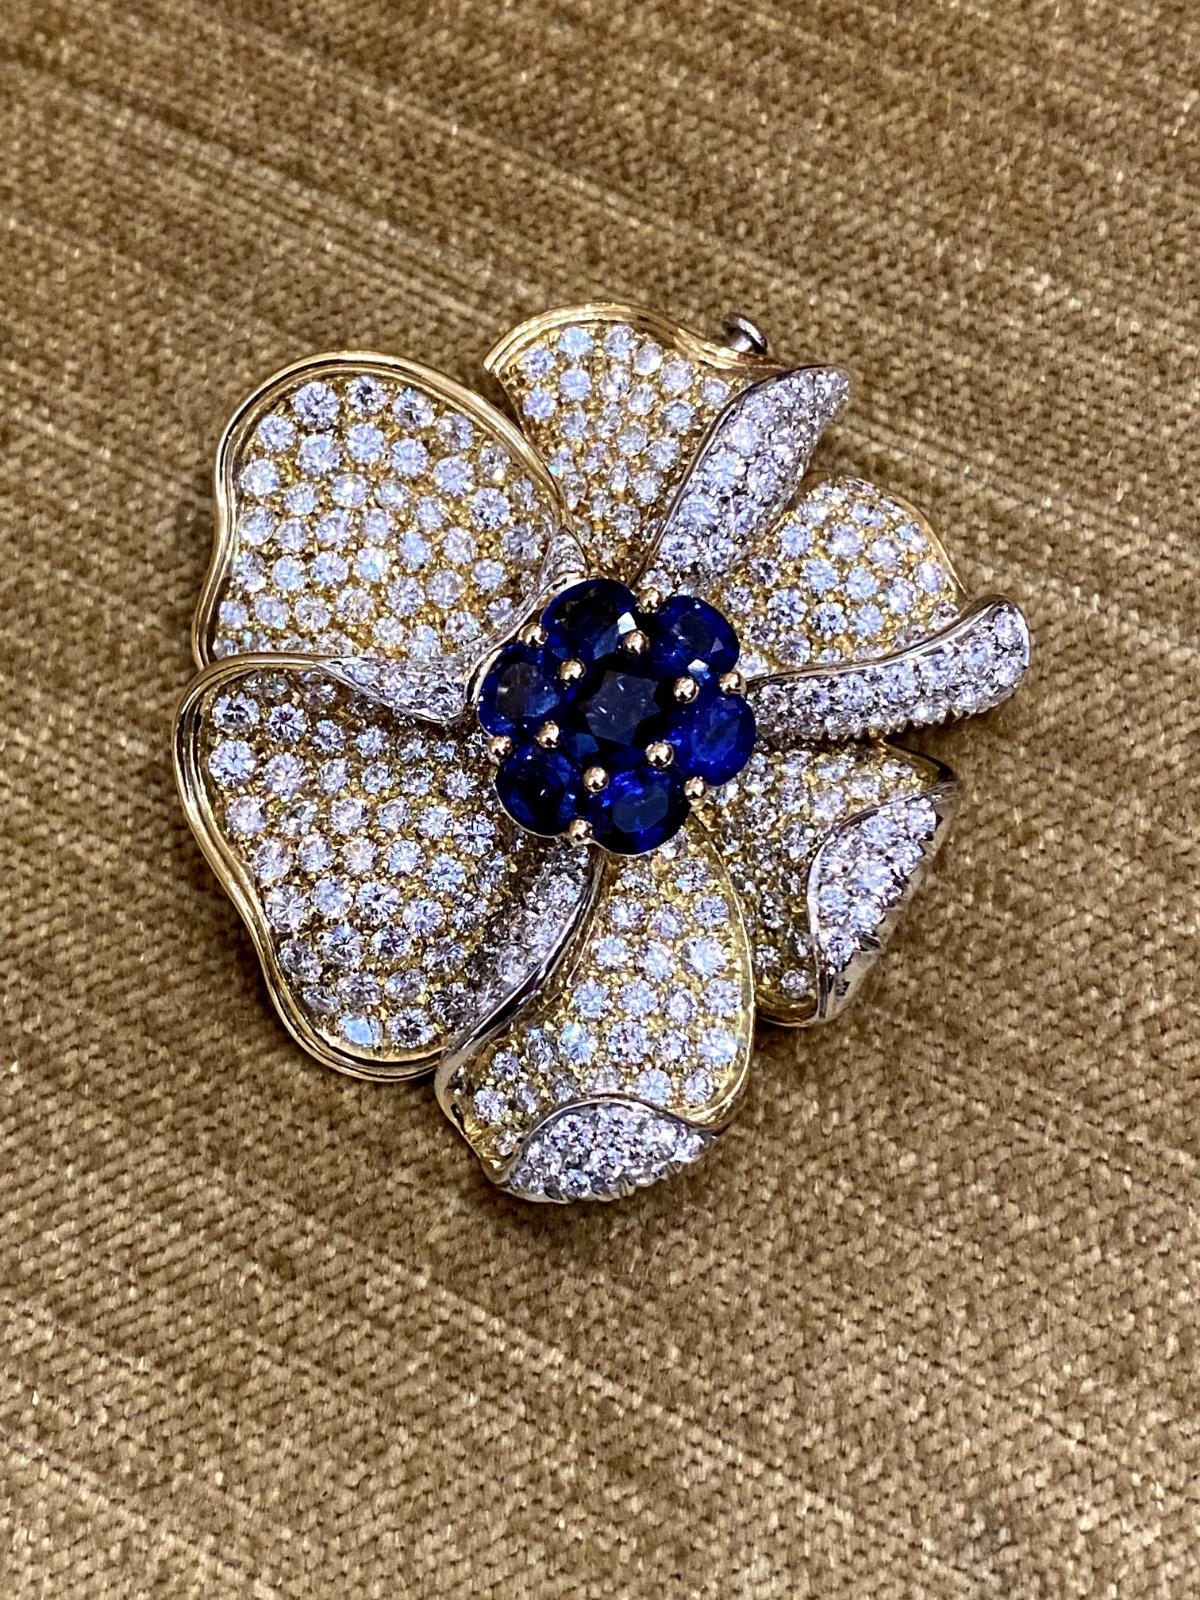 Oval Cut Picchiotti Sapphire and Diamond Flower Brooch in 18k Yellow Gold Large For Sale